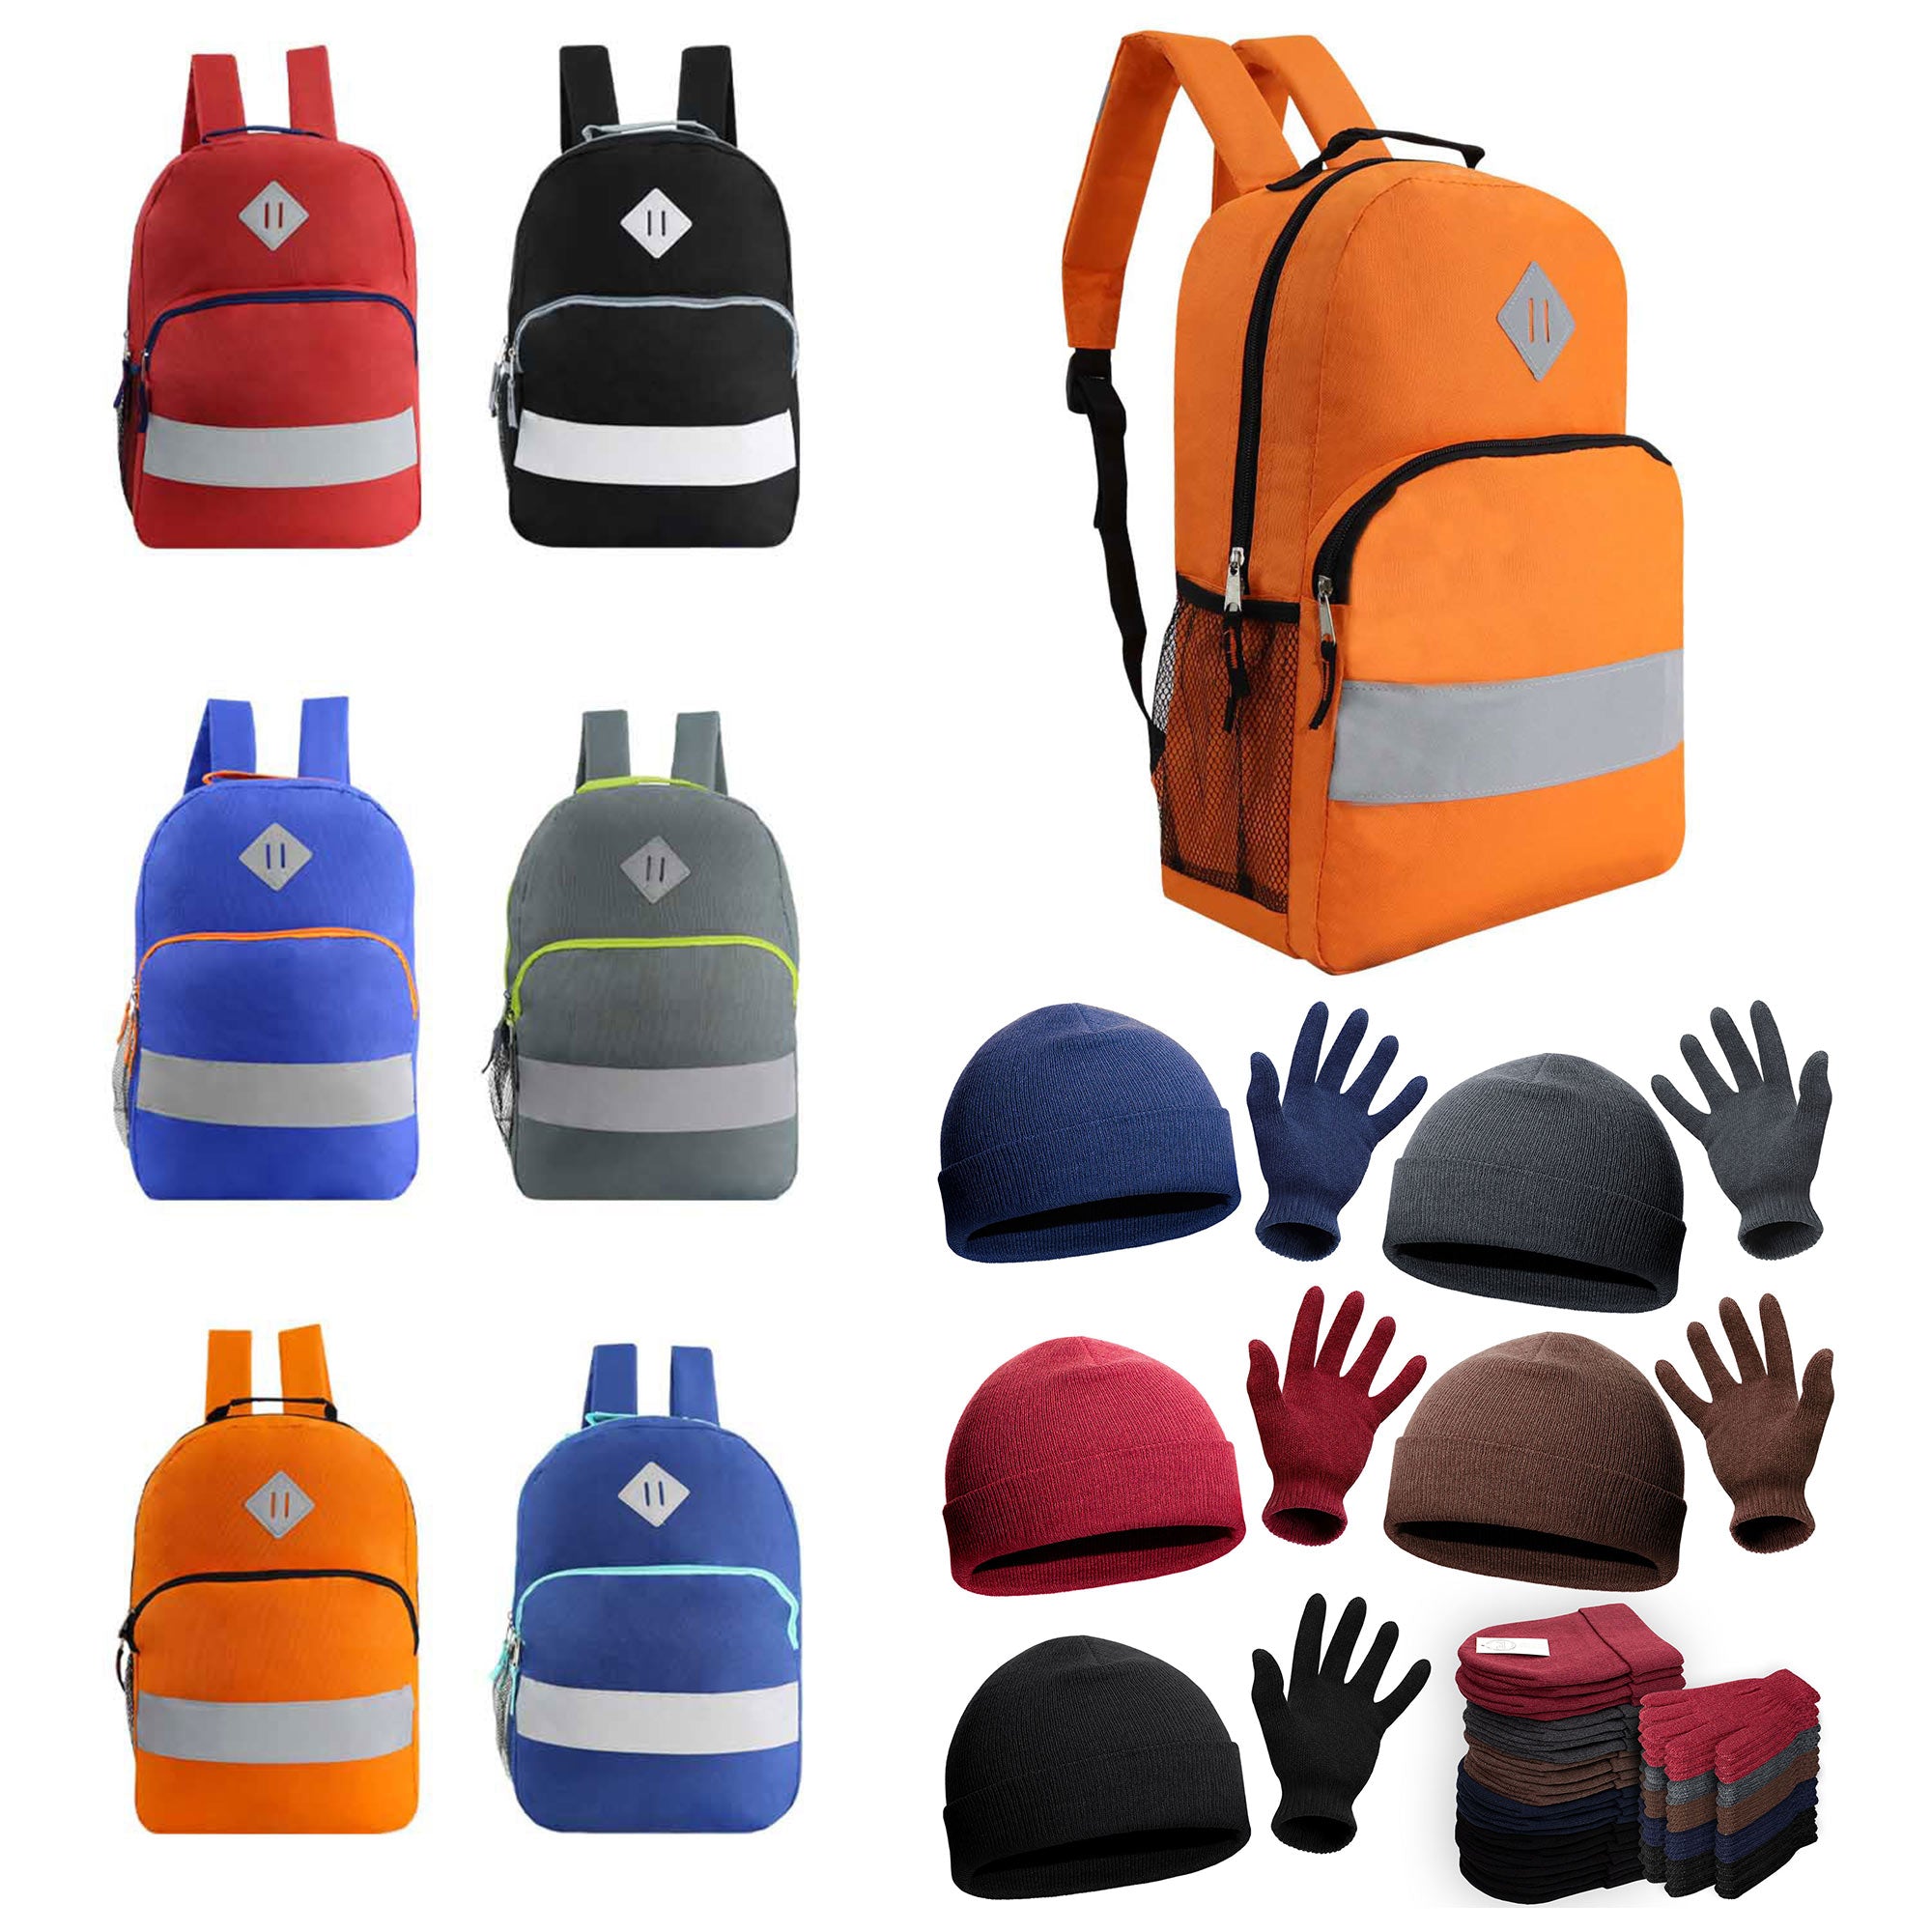 Bulk Case of 12 Reflective Backpacks and 12 Winter Item Sets - Wholesale Care Package - Emergencies, Homeless, Charity